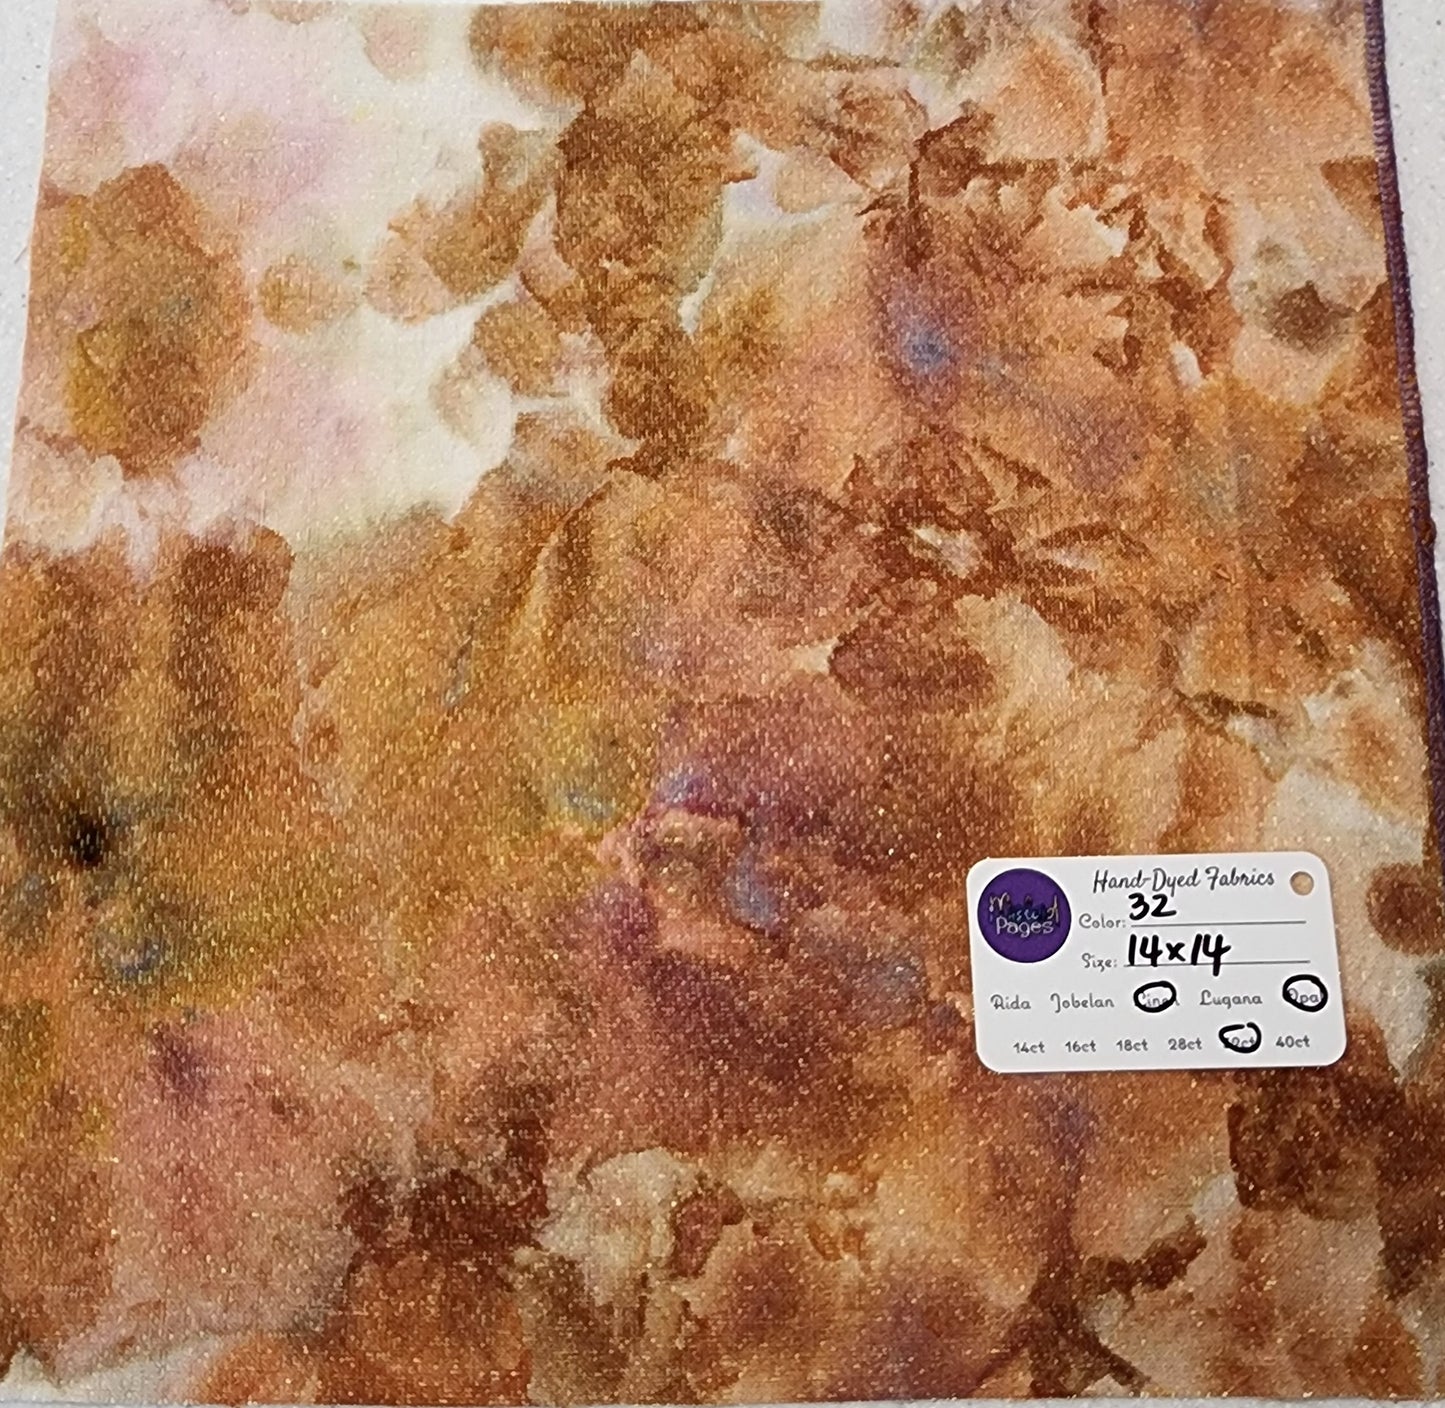 40ct Opal Linen - "Autumn's Bounty" Lot #32 - Hand-Dyed Fabric - October 2022 Release